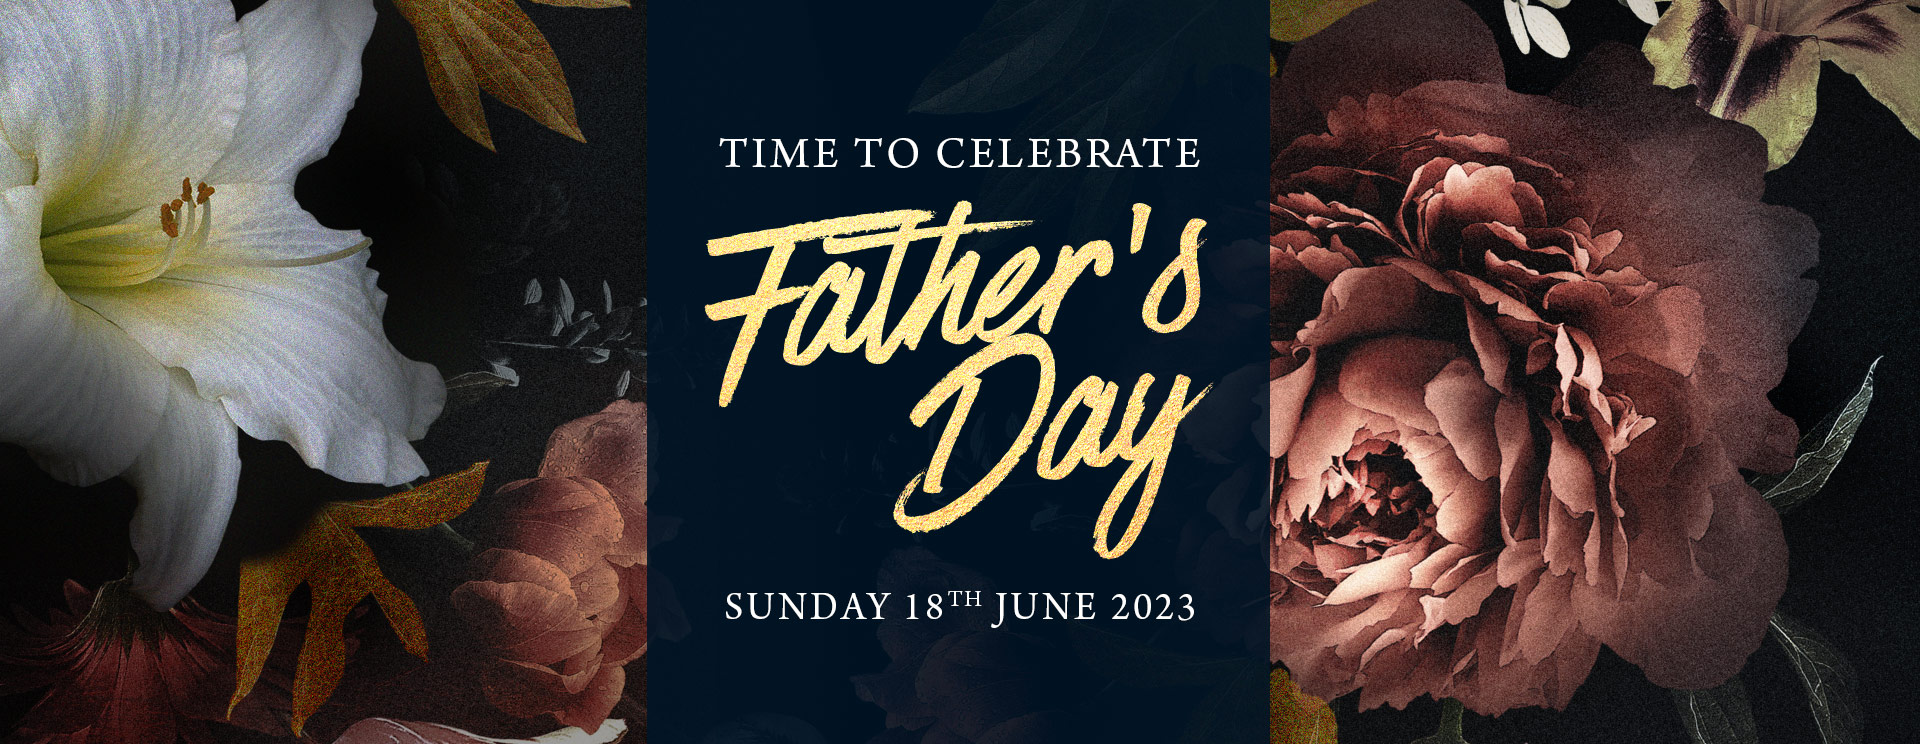 Fathers Day at The Boot Inn